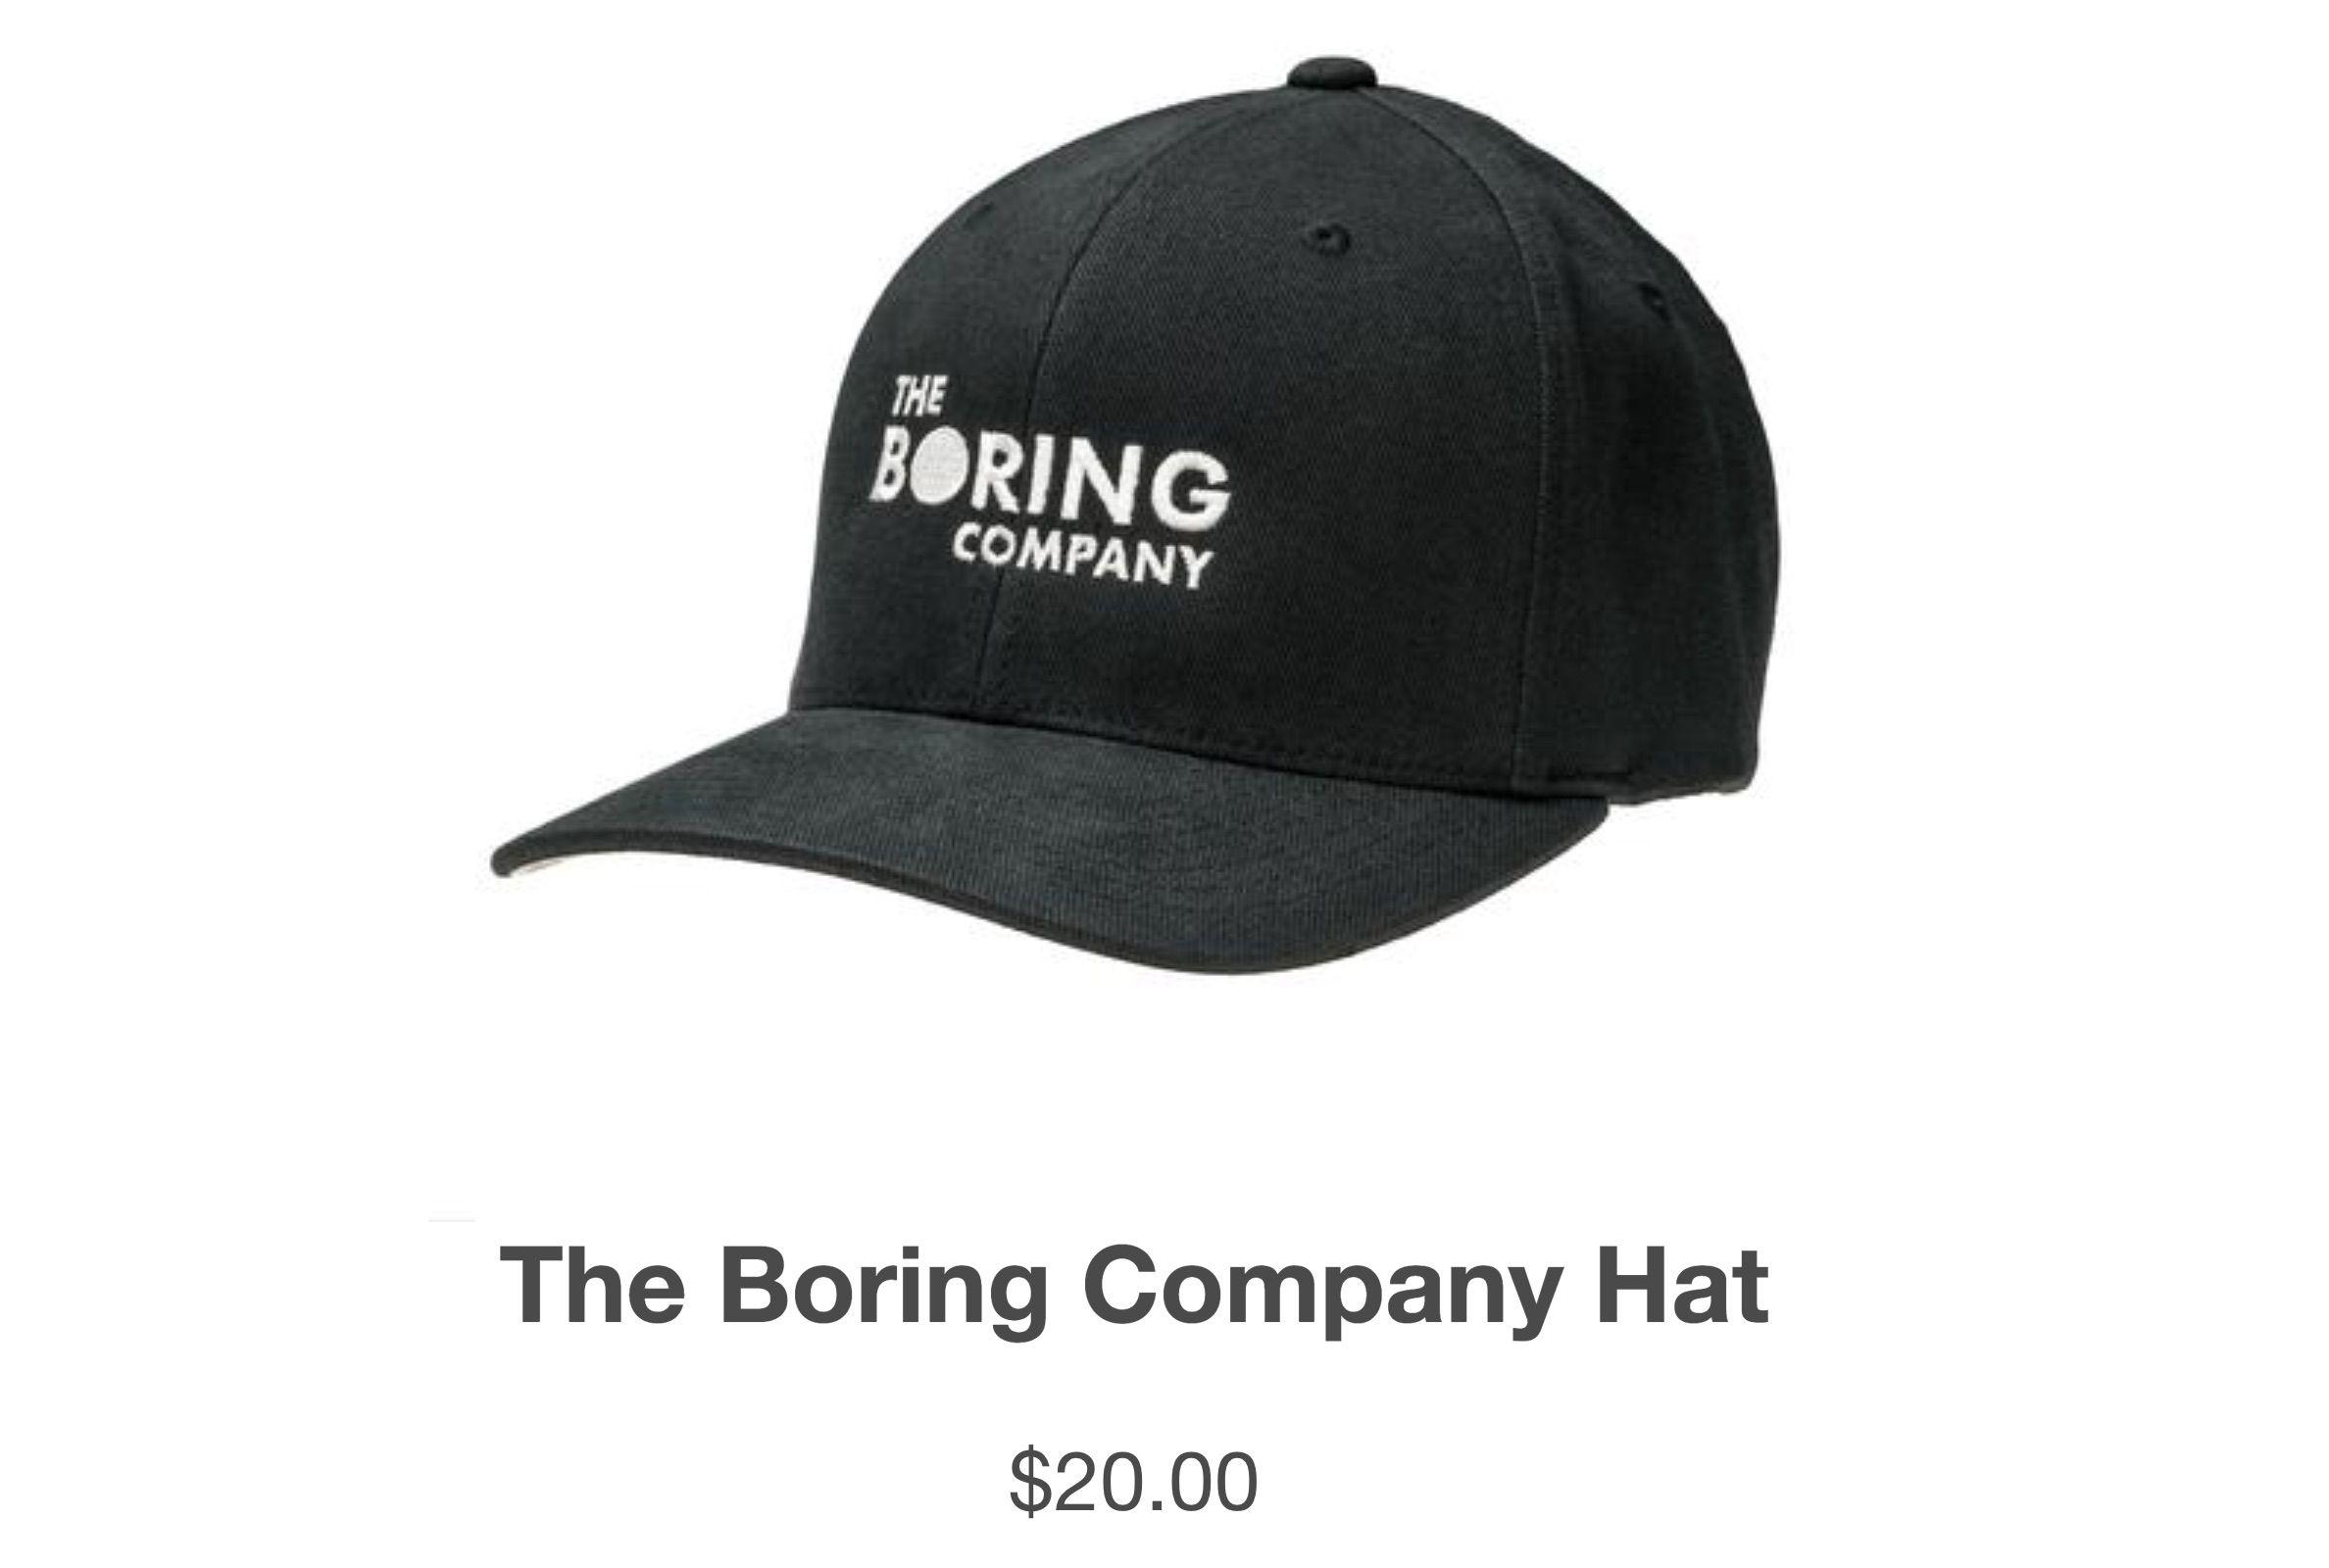 The Boring Company Elon Logo - Elon Musk sold $80k worth of The Boring Company hats in under 24 hours